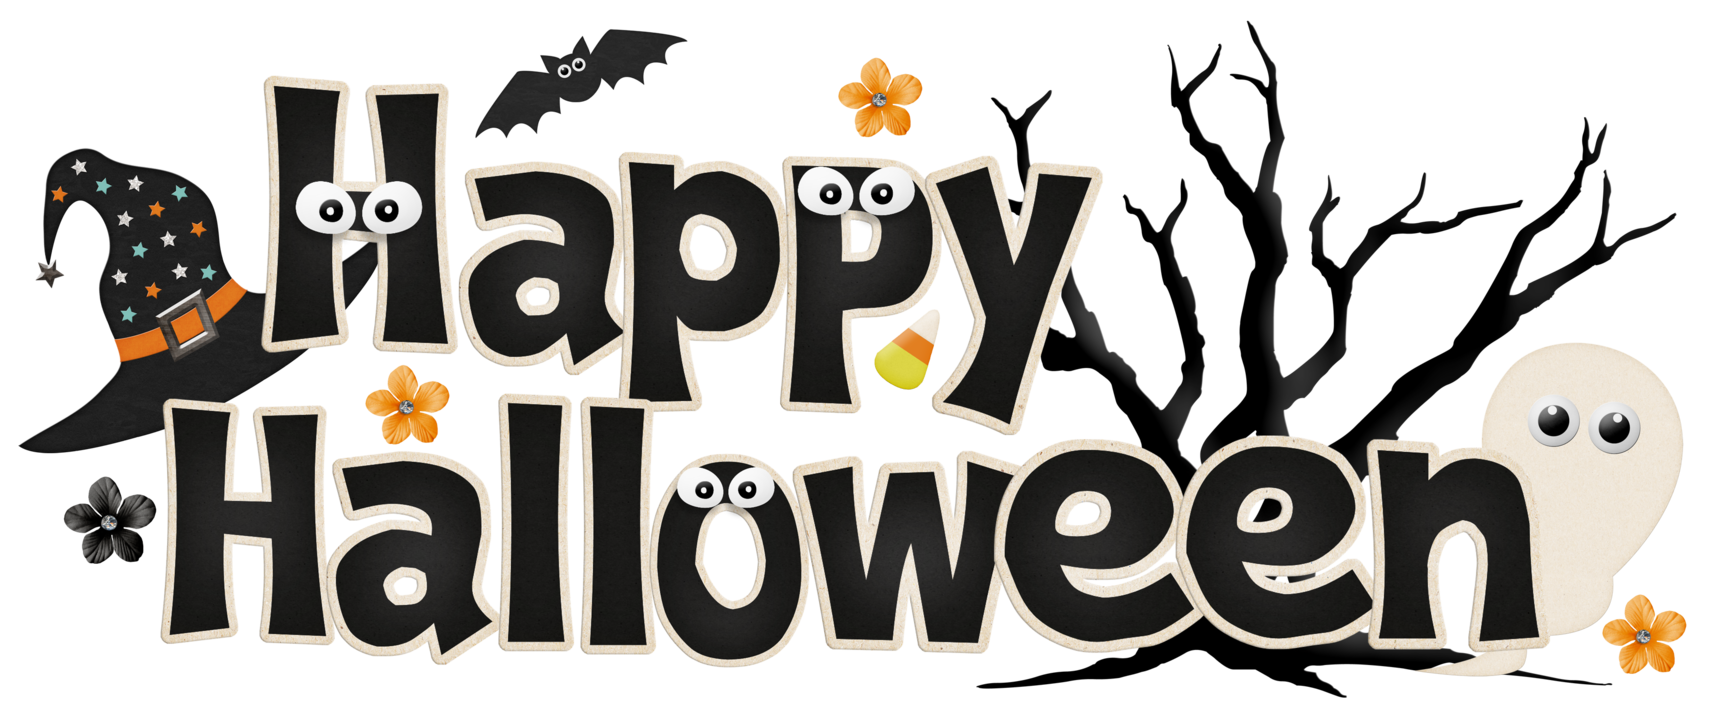 halloween clipart for email - photo #47